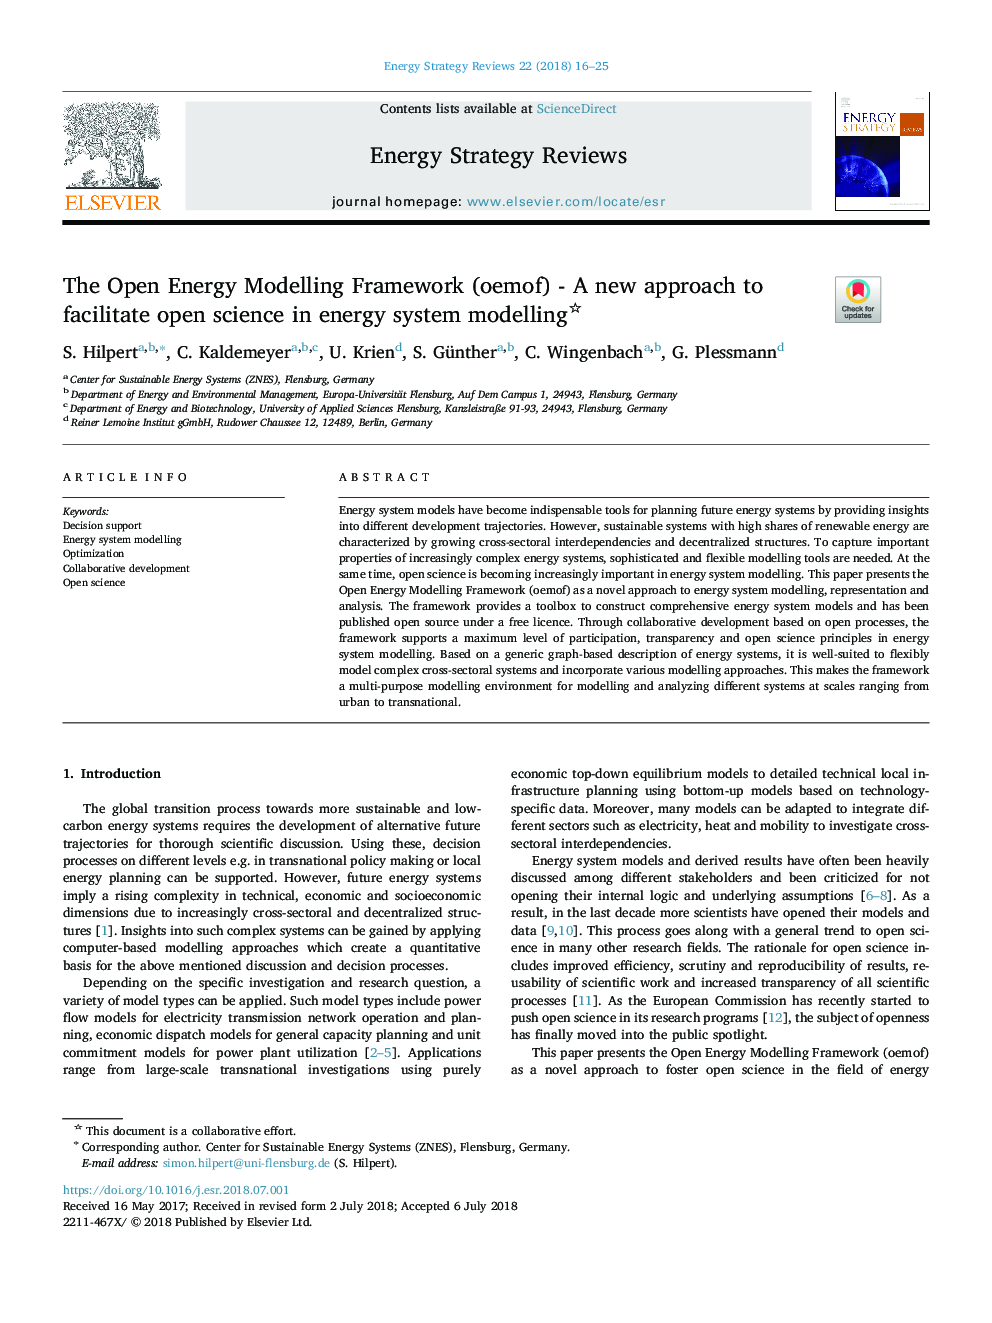 The Open Energy Modelling Framework (oemof) - A new approach to facilitate open science in energy system modelling